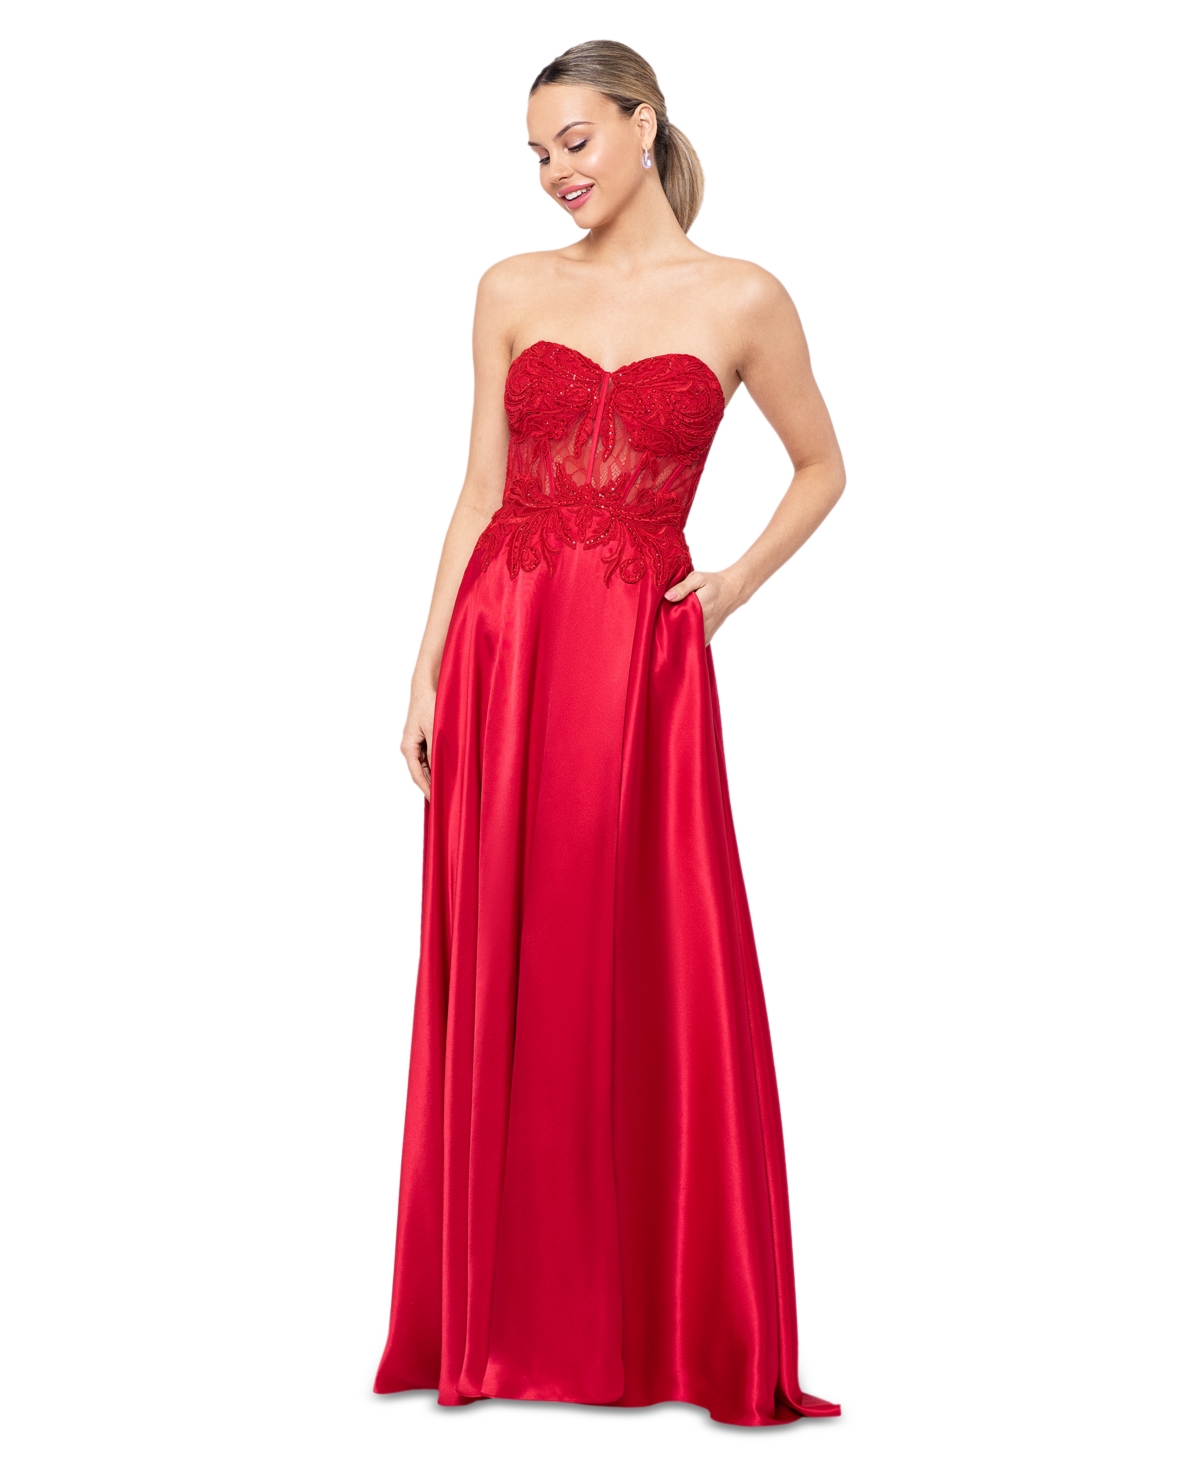 Juniors' Illusion Applique Charmeuse Gown, Created for Macy's - Red